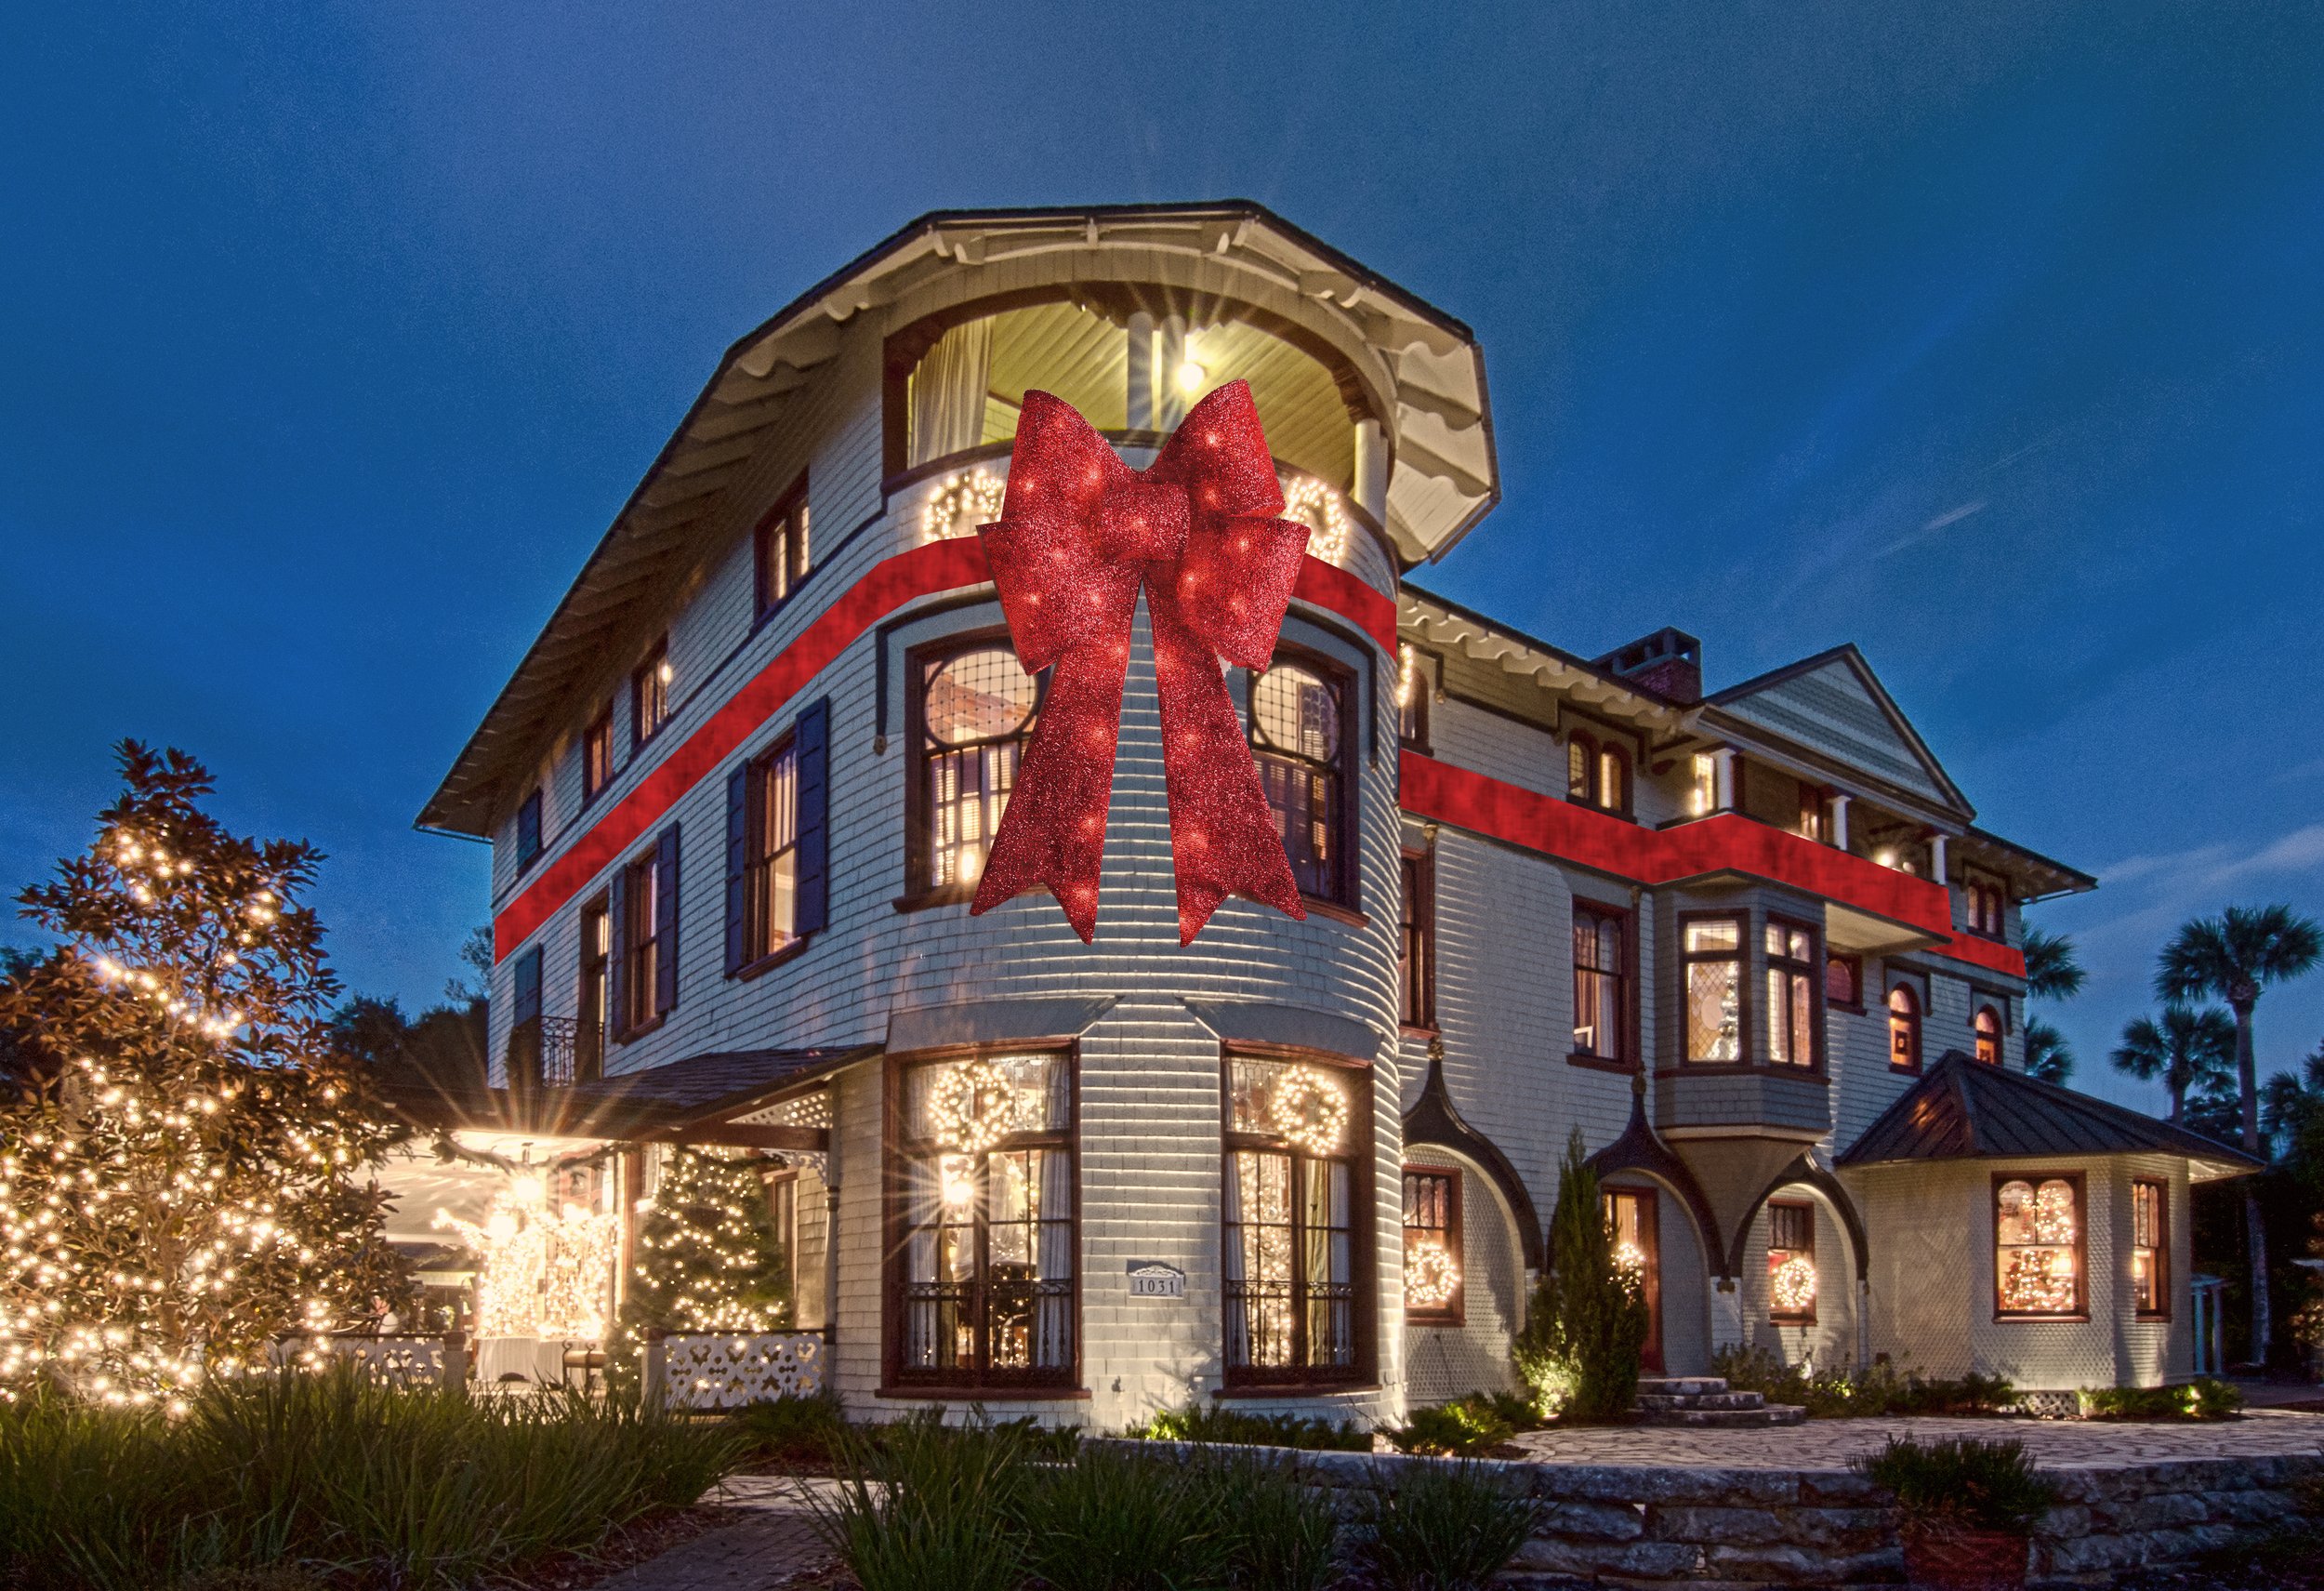 The Christmas Mansion — The Stetson Mansion